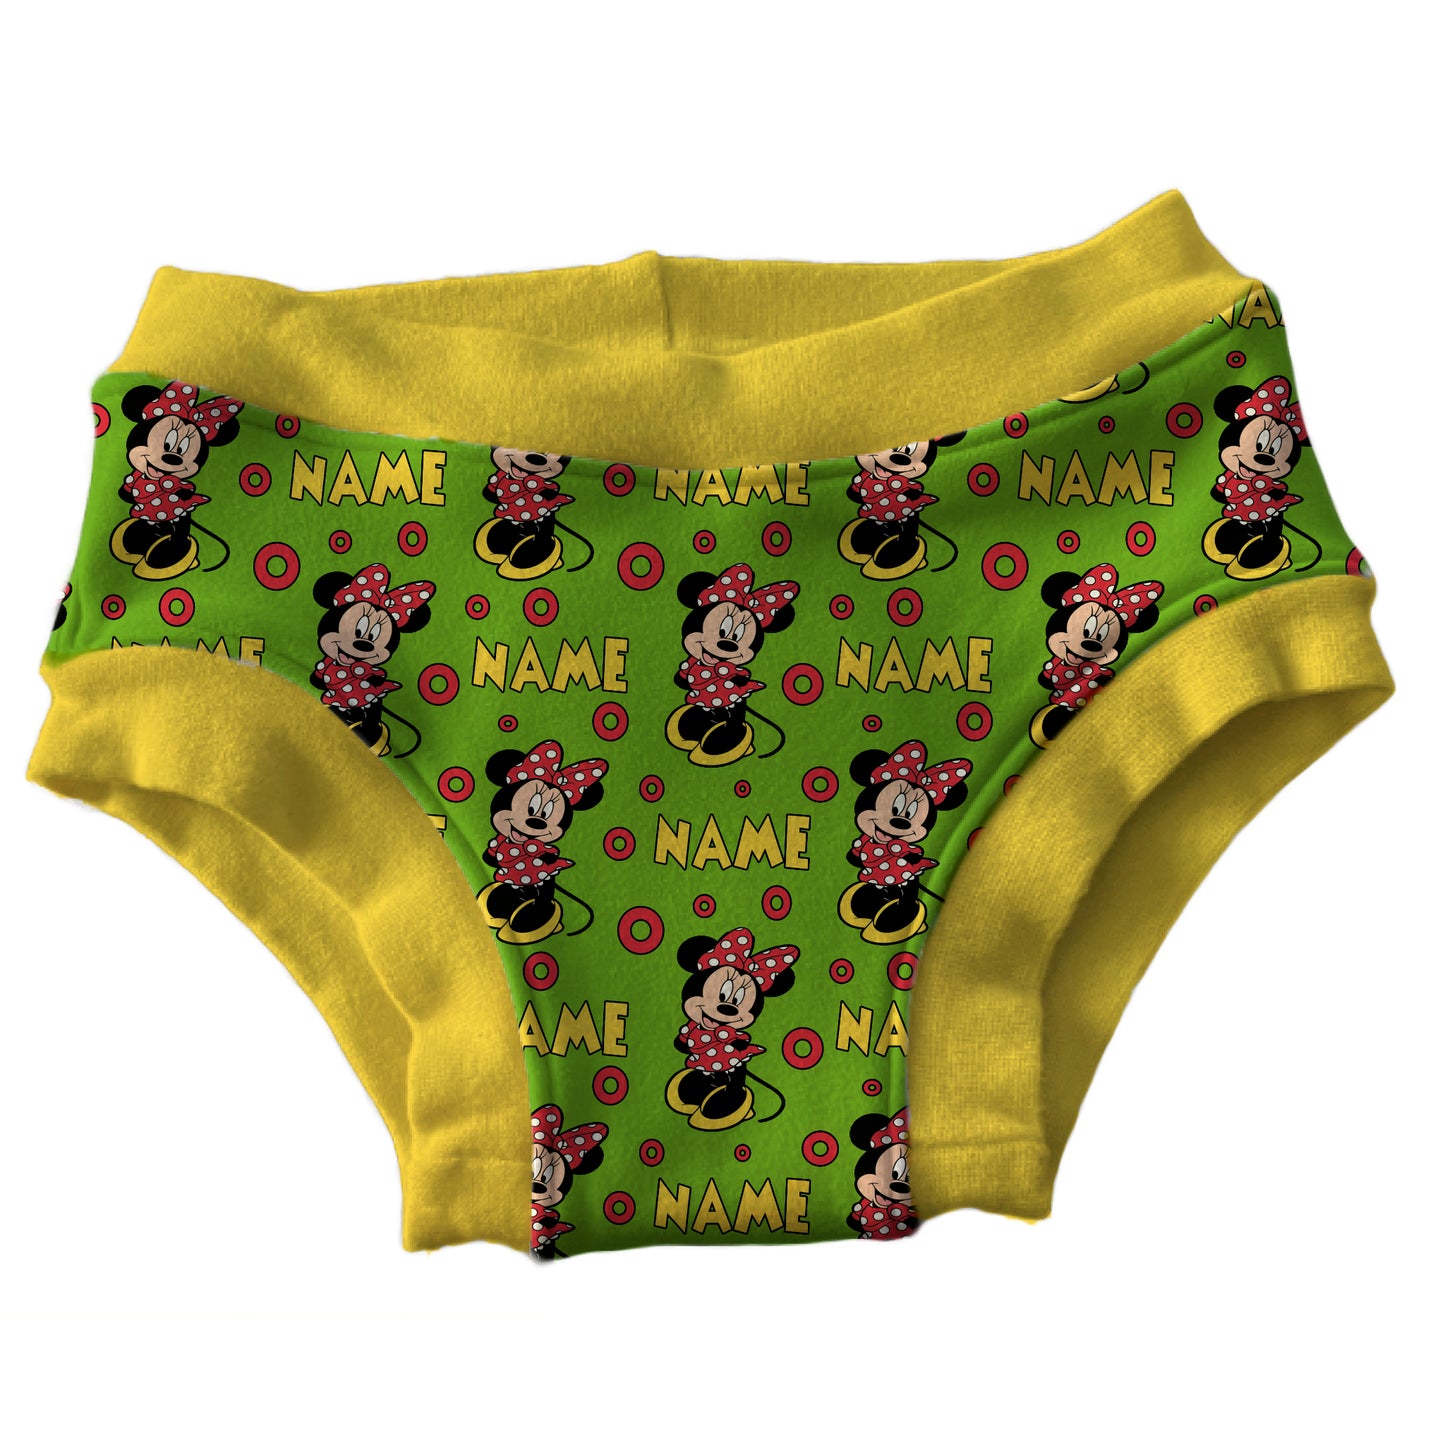 Minnie Mouse Cloth Pull-Ups